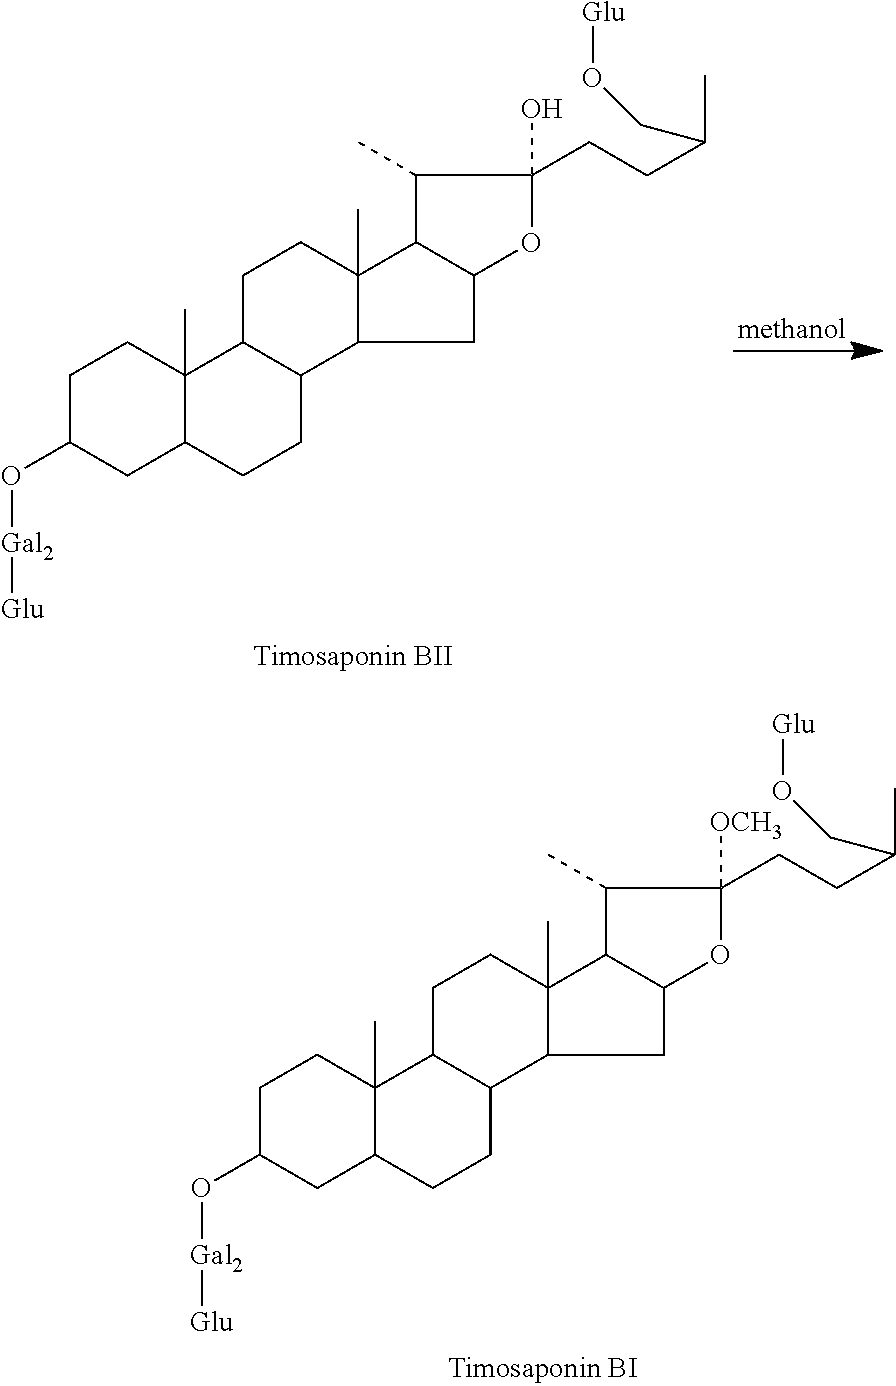 Process for preparation of timosaponin B II